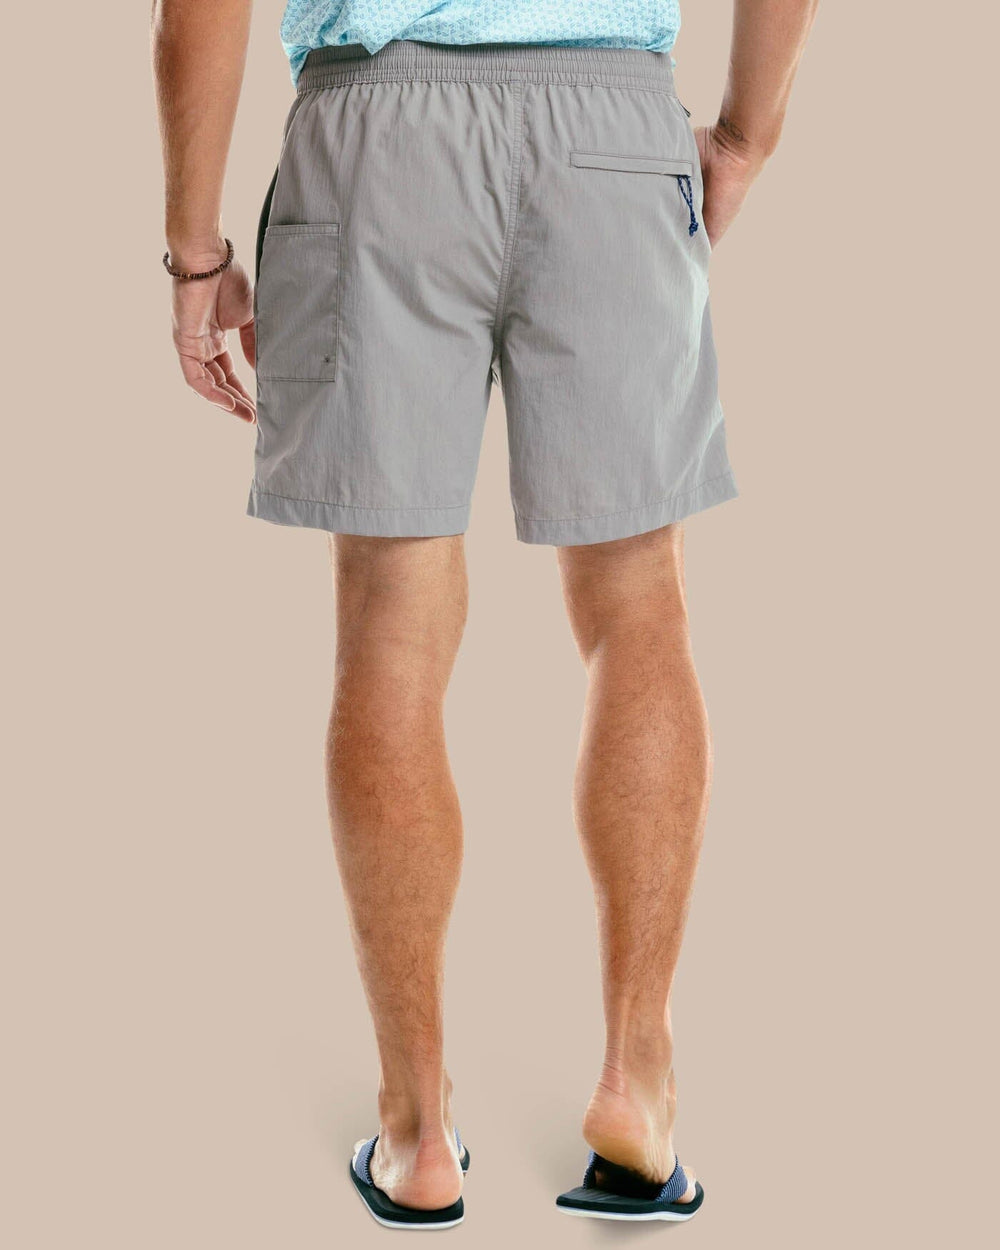 The model back view of the Men's Shoreline 6 Inch Short by Southern Tide  - Frost Grey